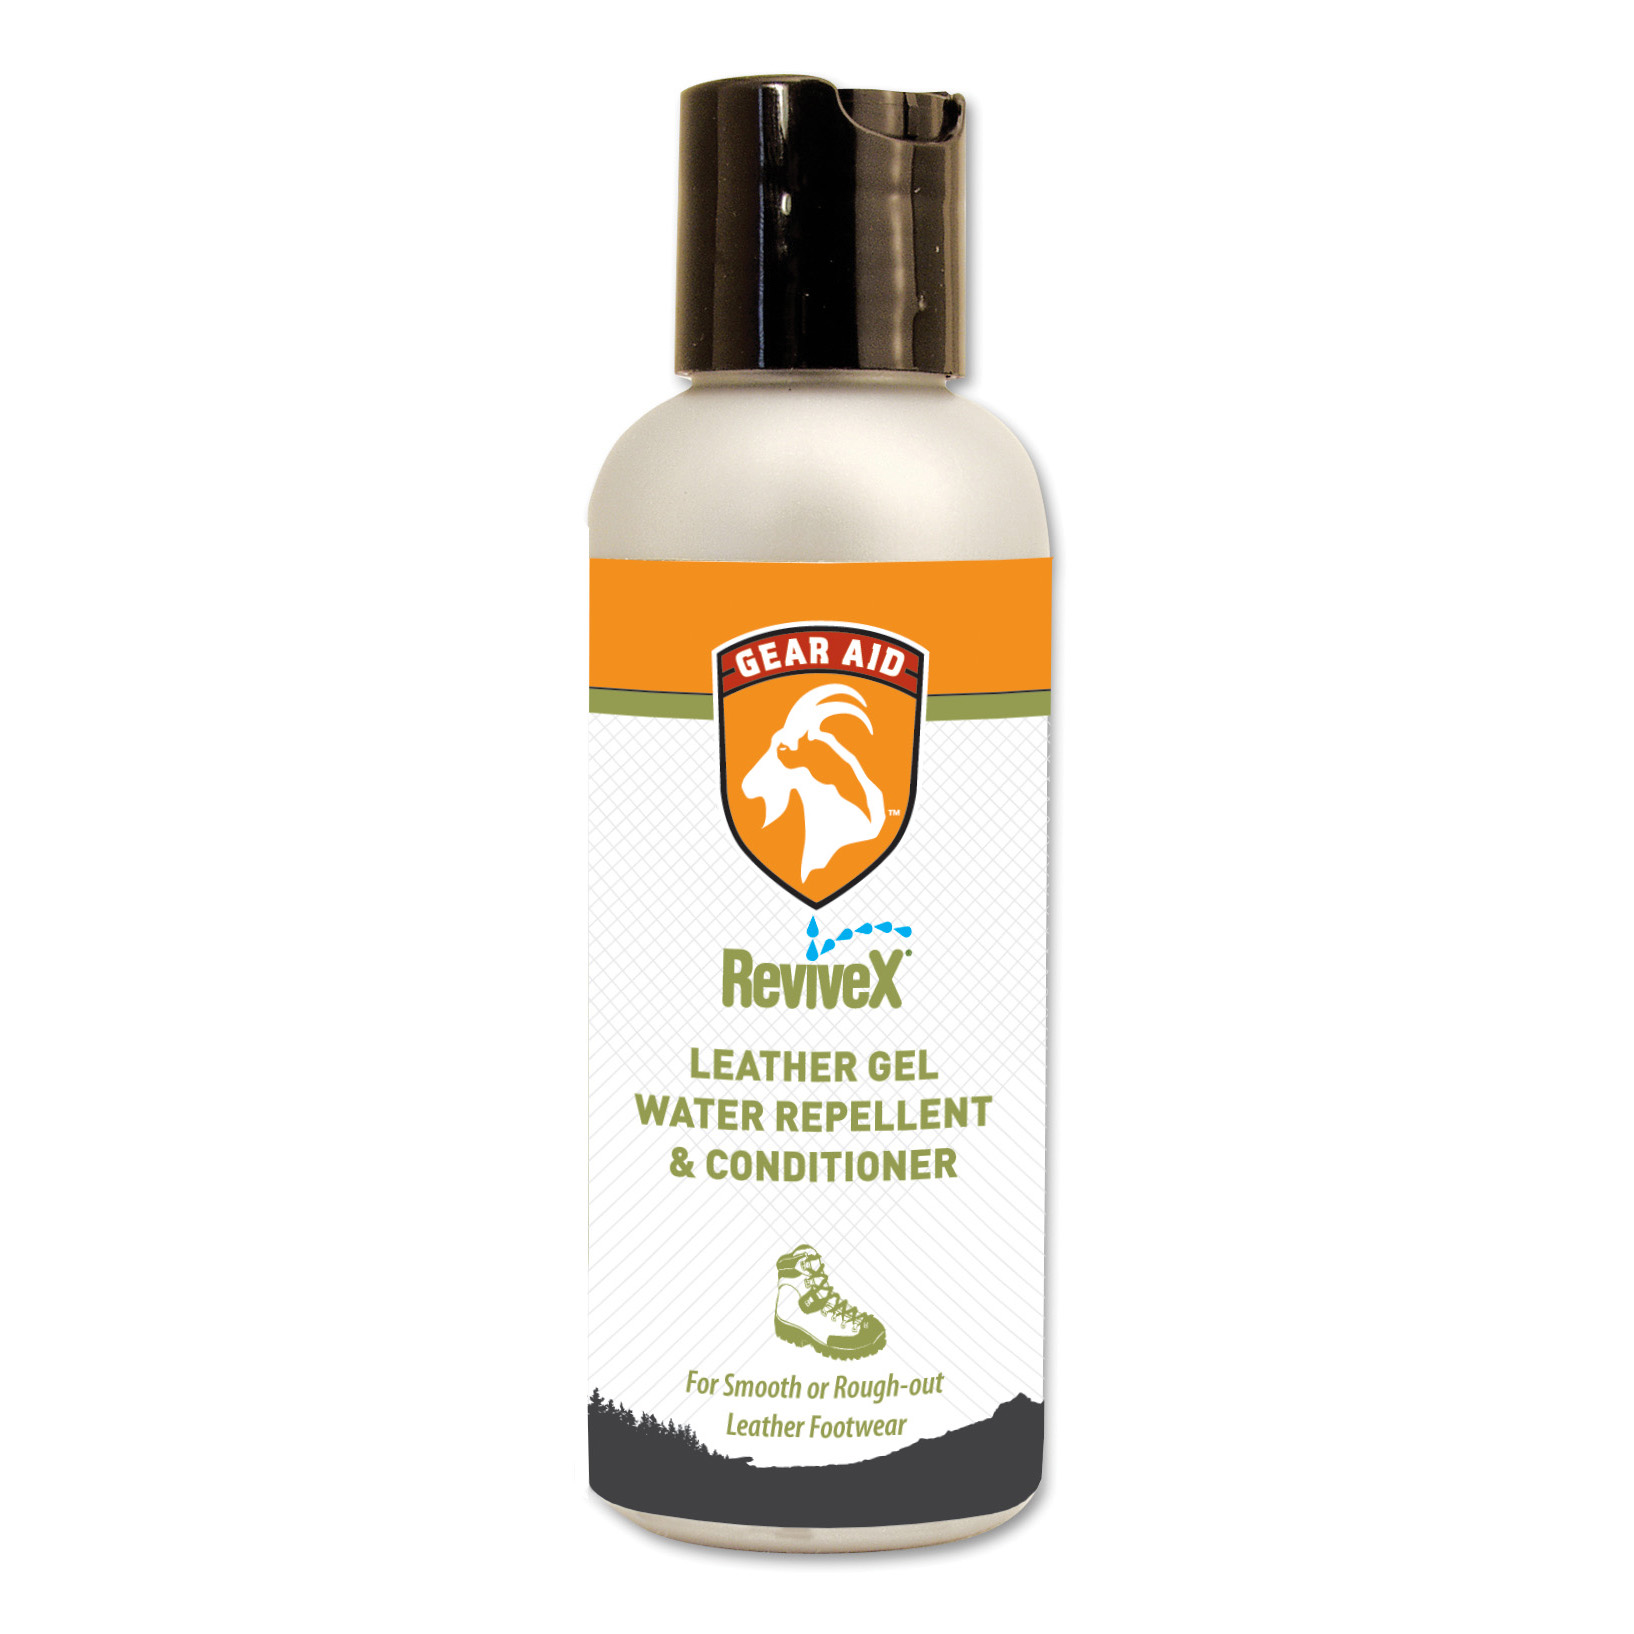 NcNett Gear Aid Leather Gel Revivex 4 Ounce Water Repellent and Conditioner